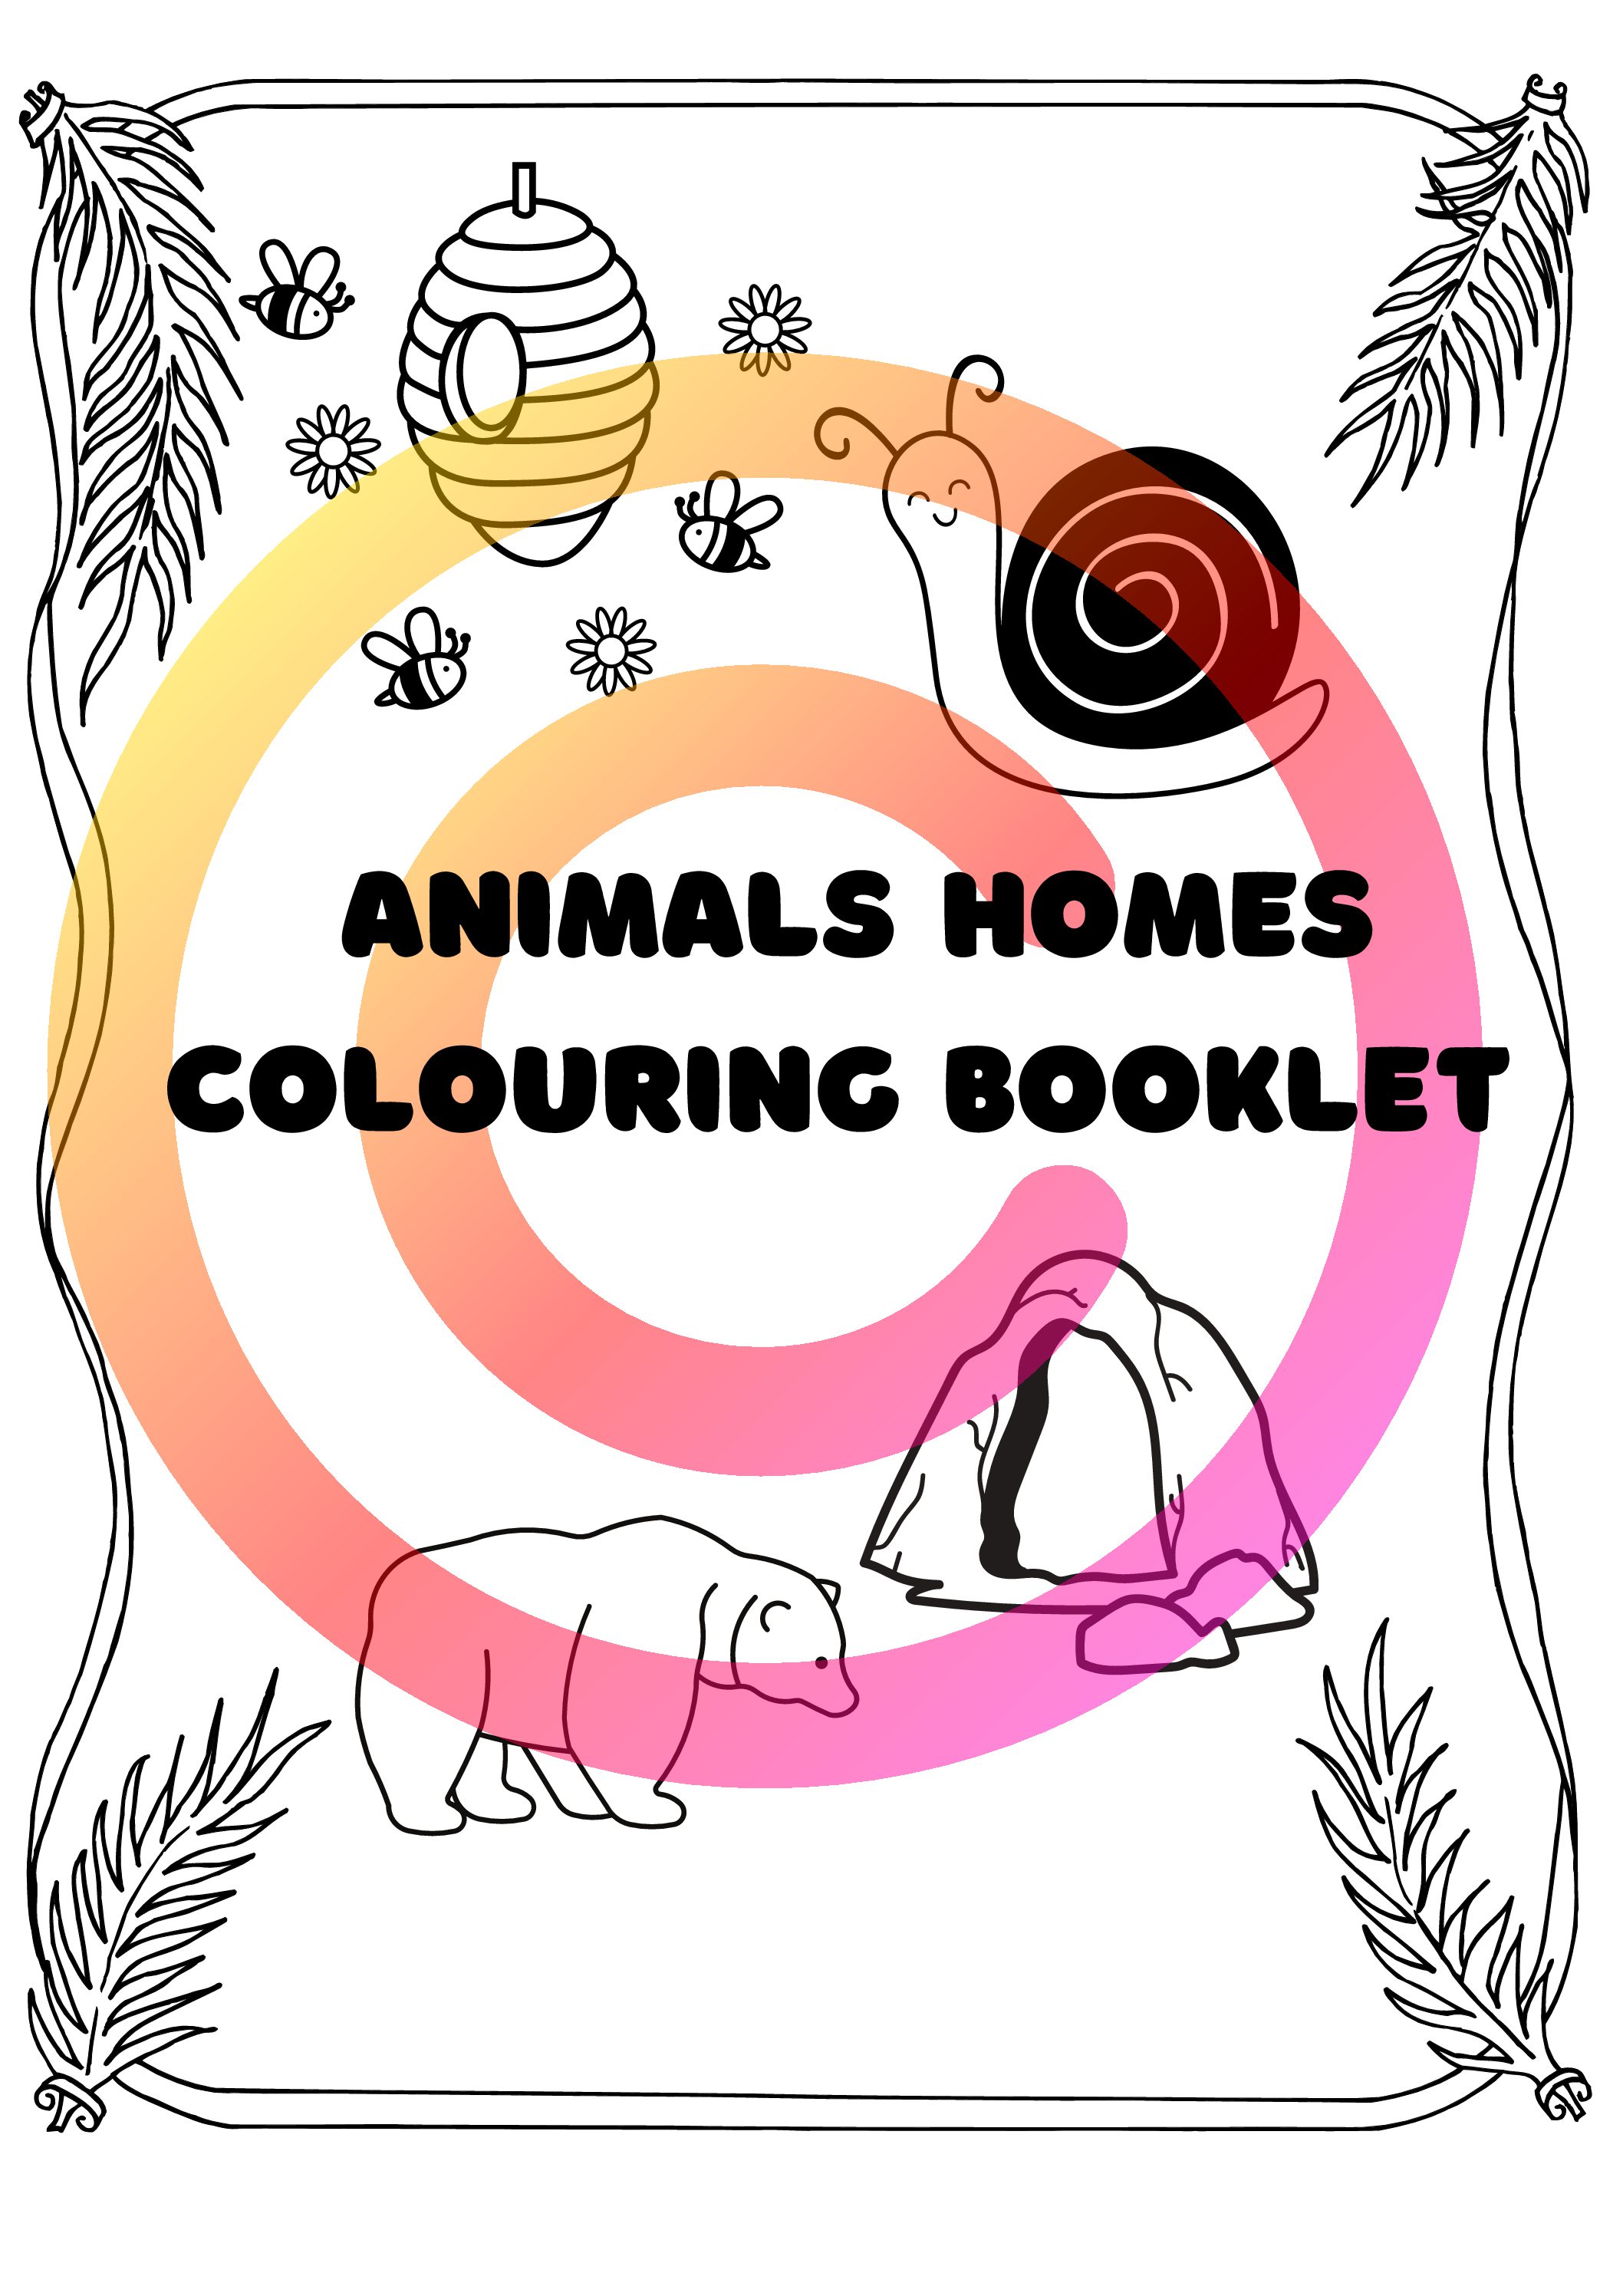 Copyright animal home colouring booklet